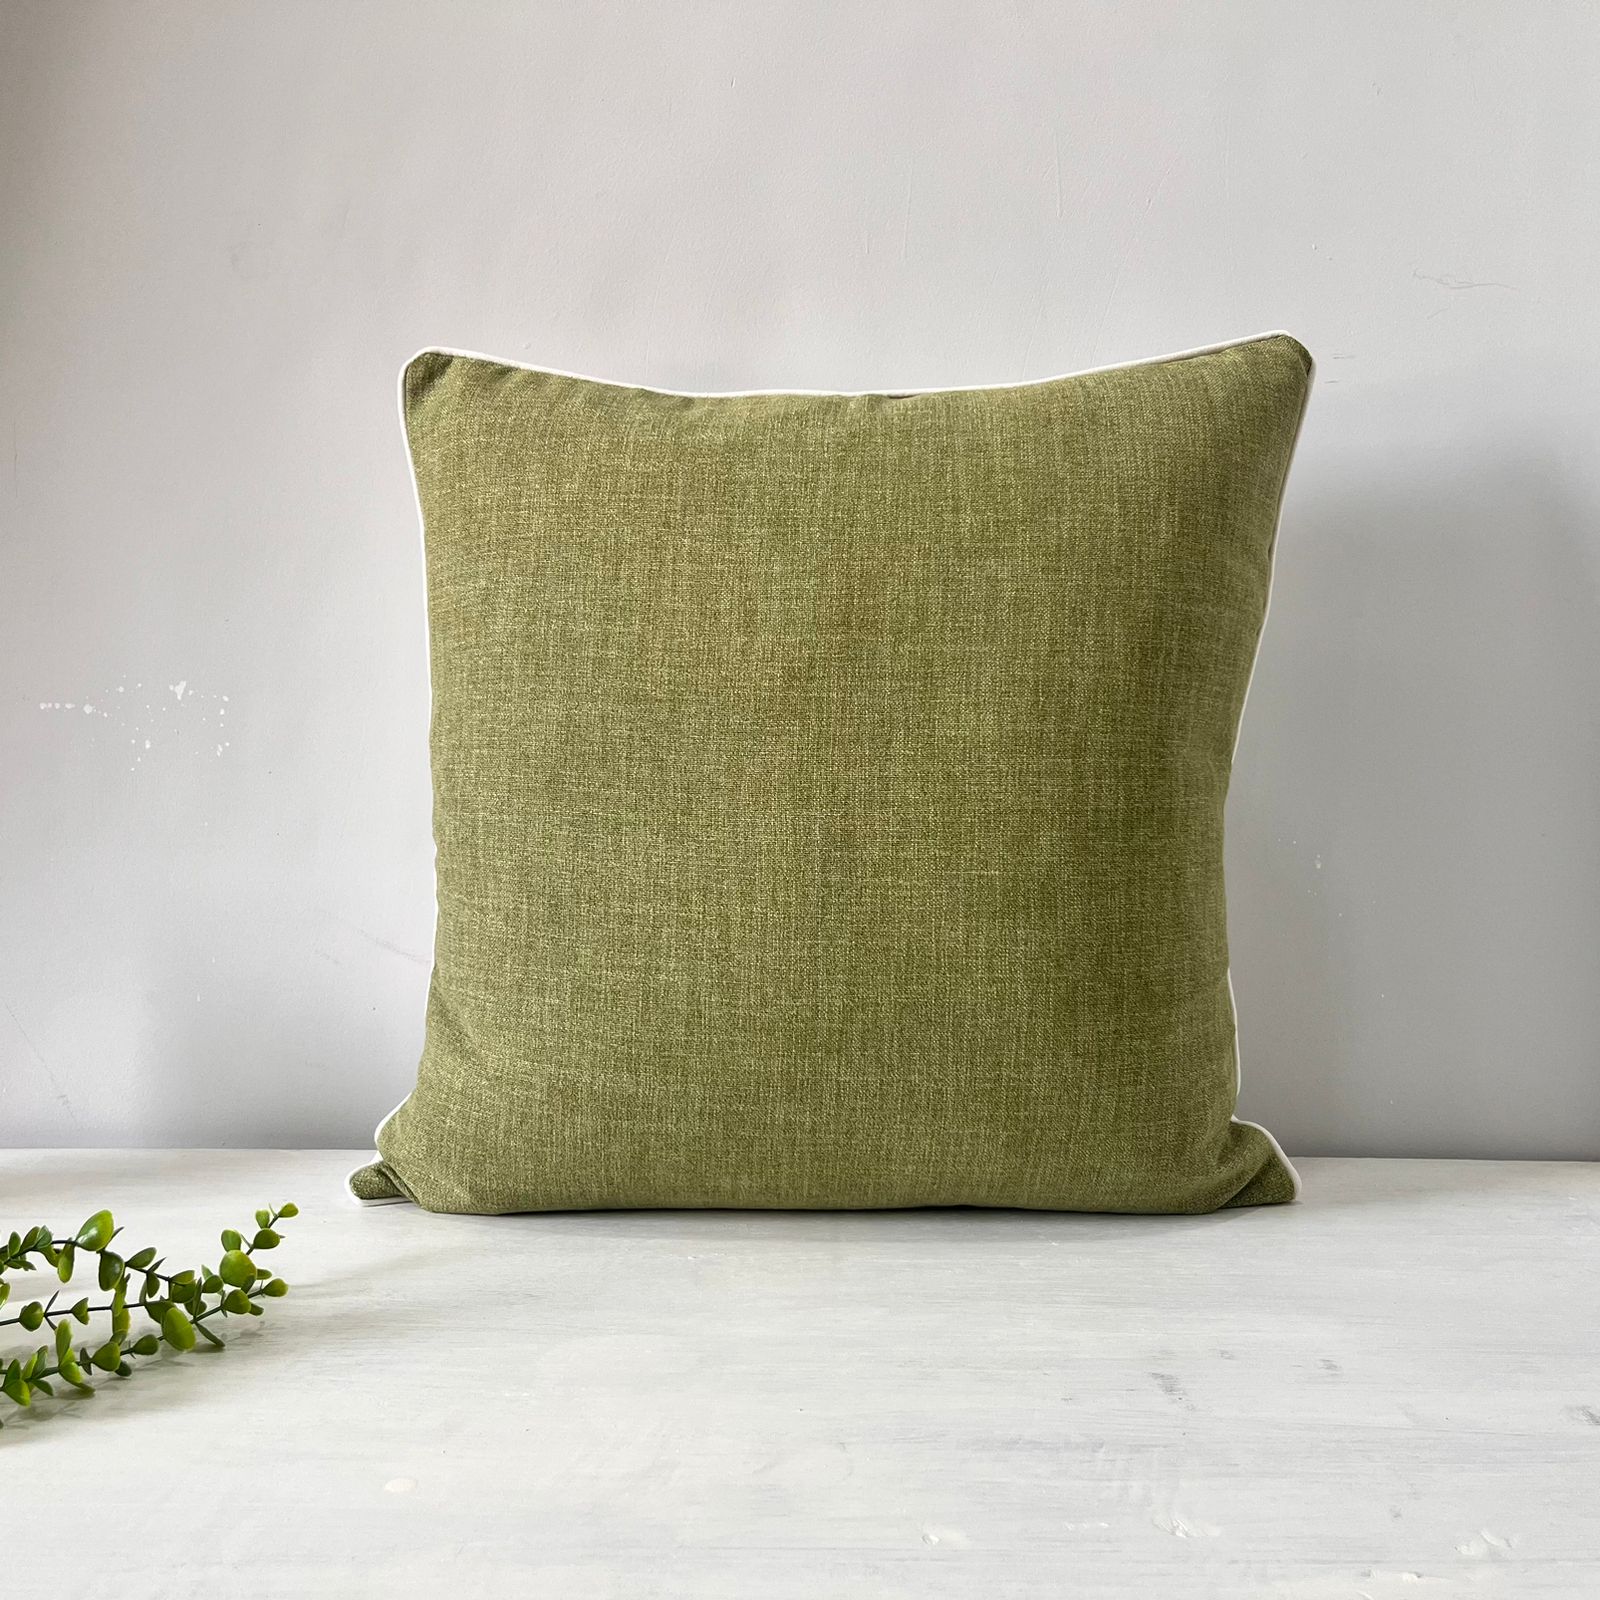 Cushion Cover with size of 60cm X 60cm (24" X 24")